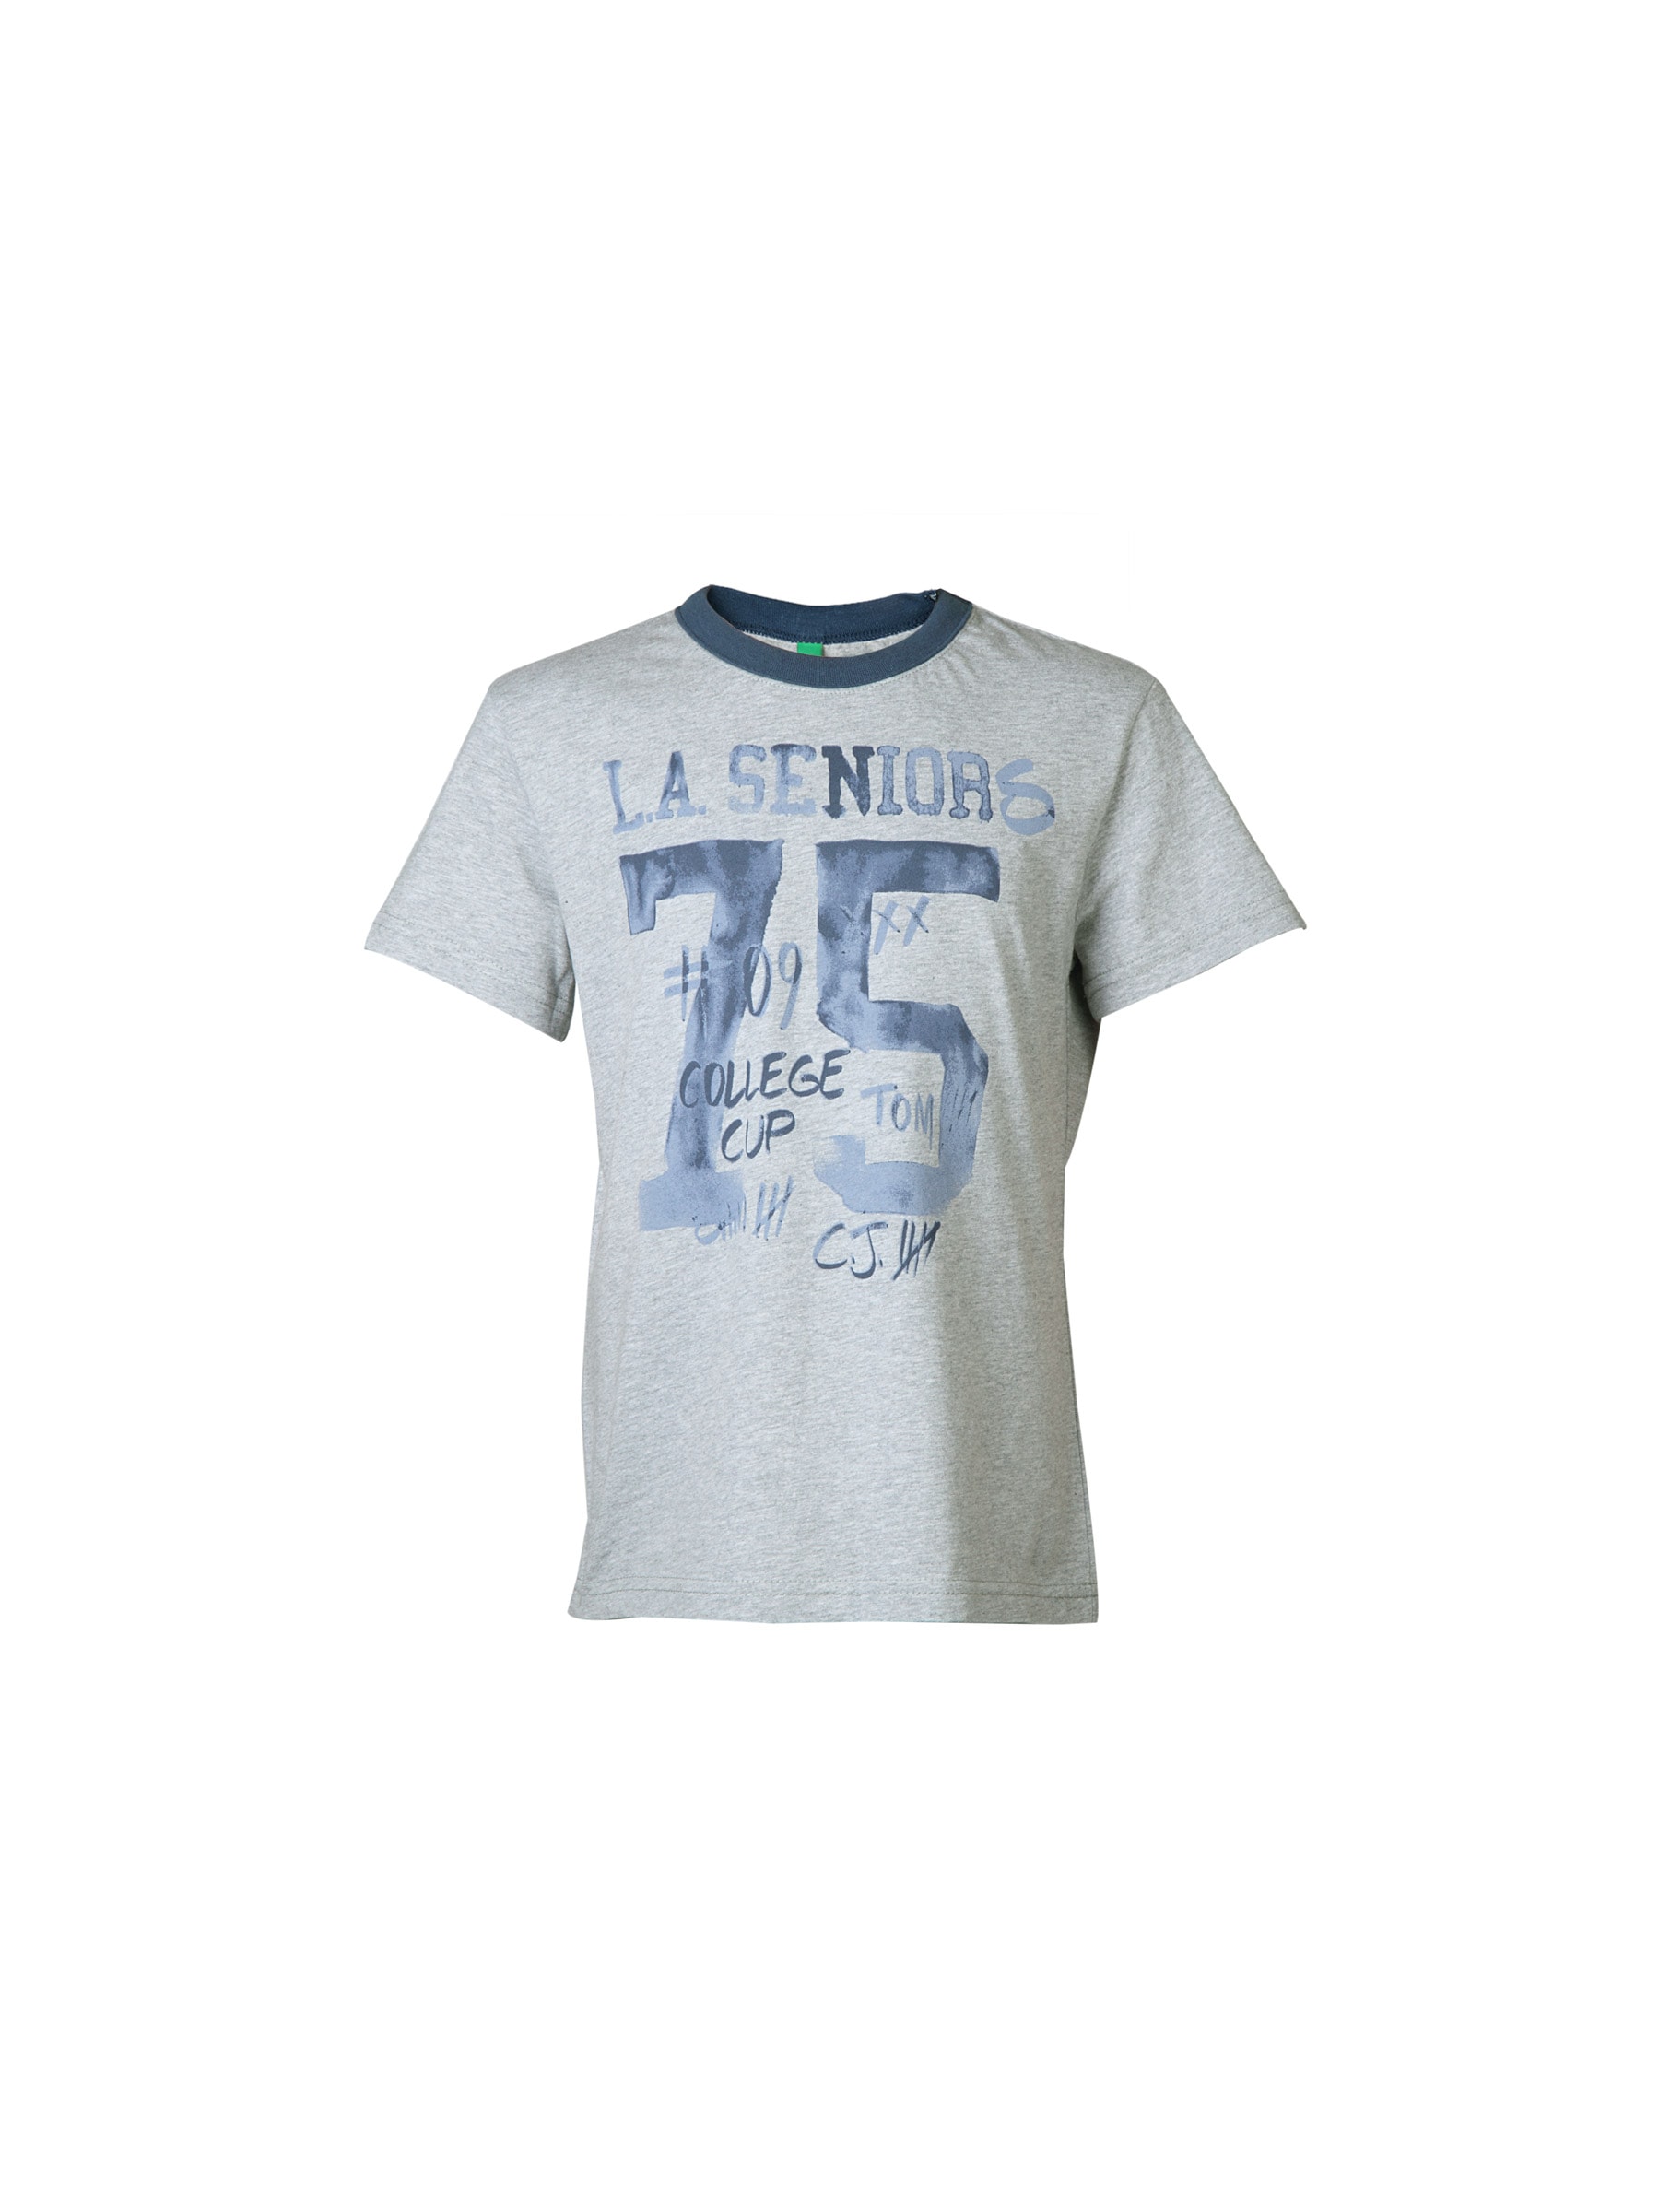 United Colors of Benetton Kids Boys Grey Printed T-shirt